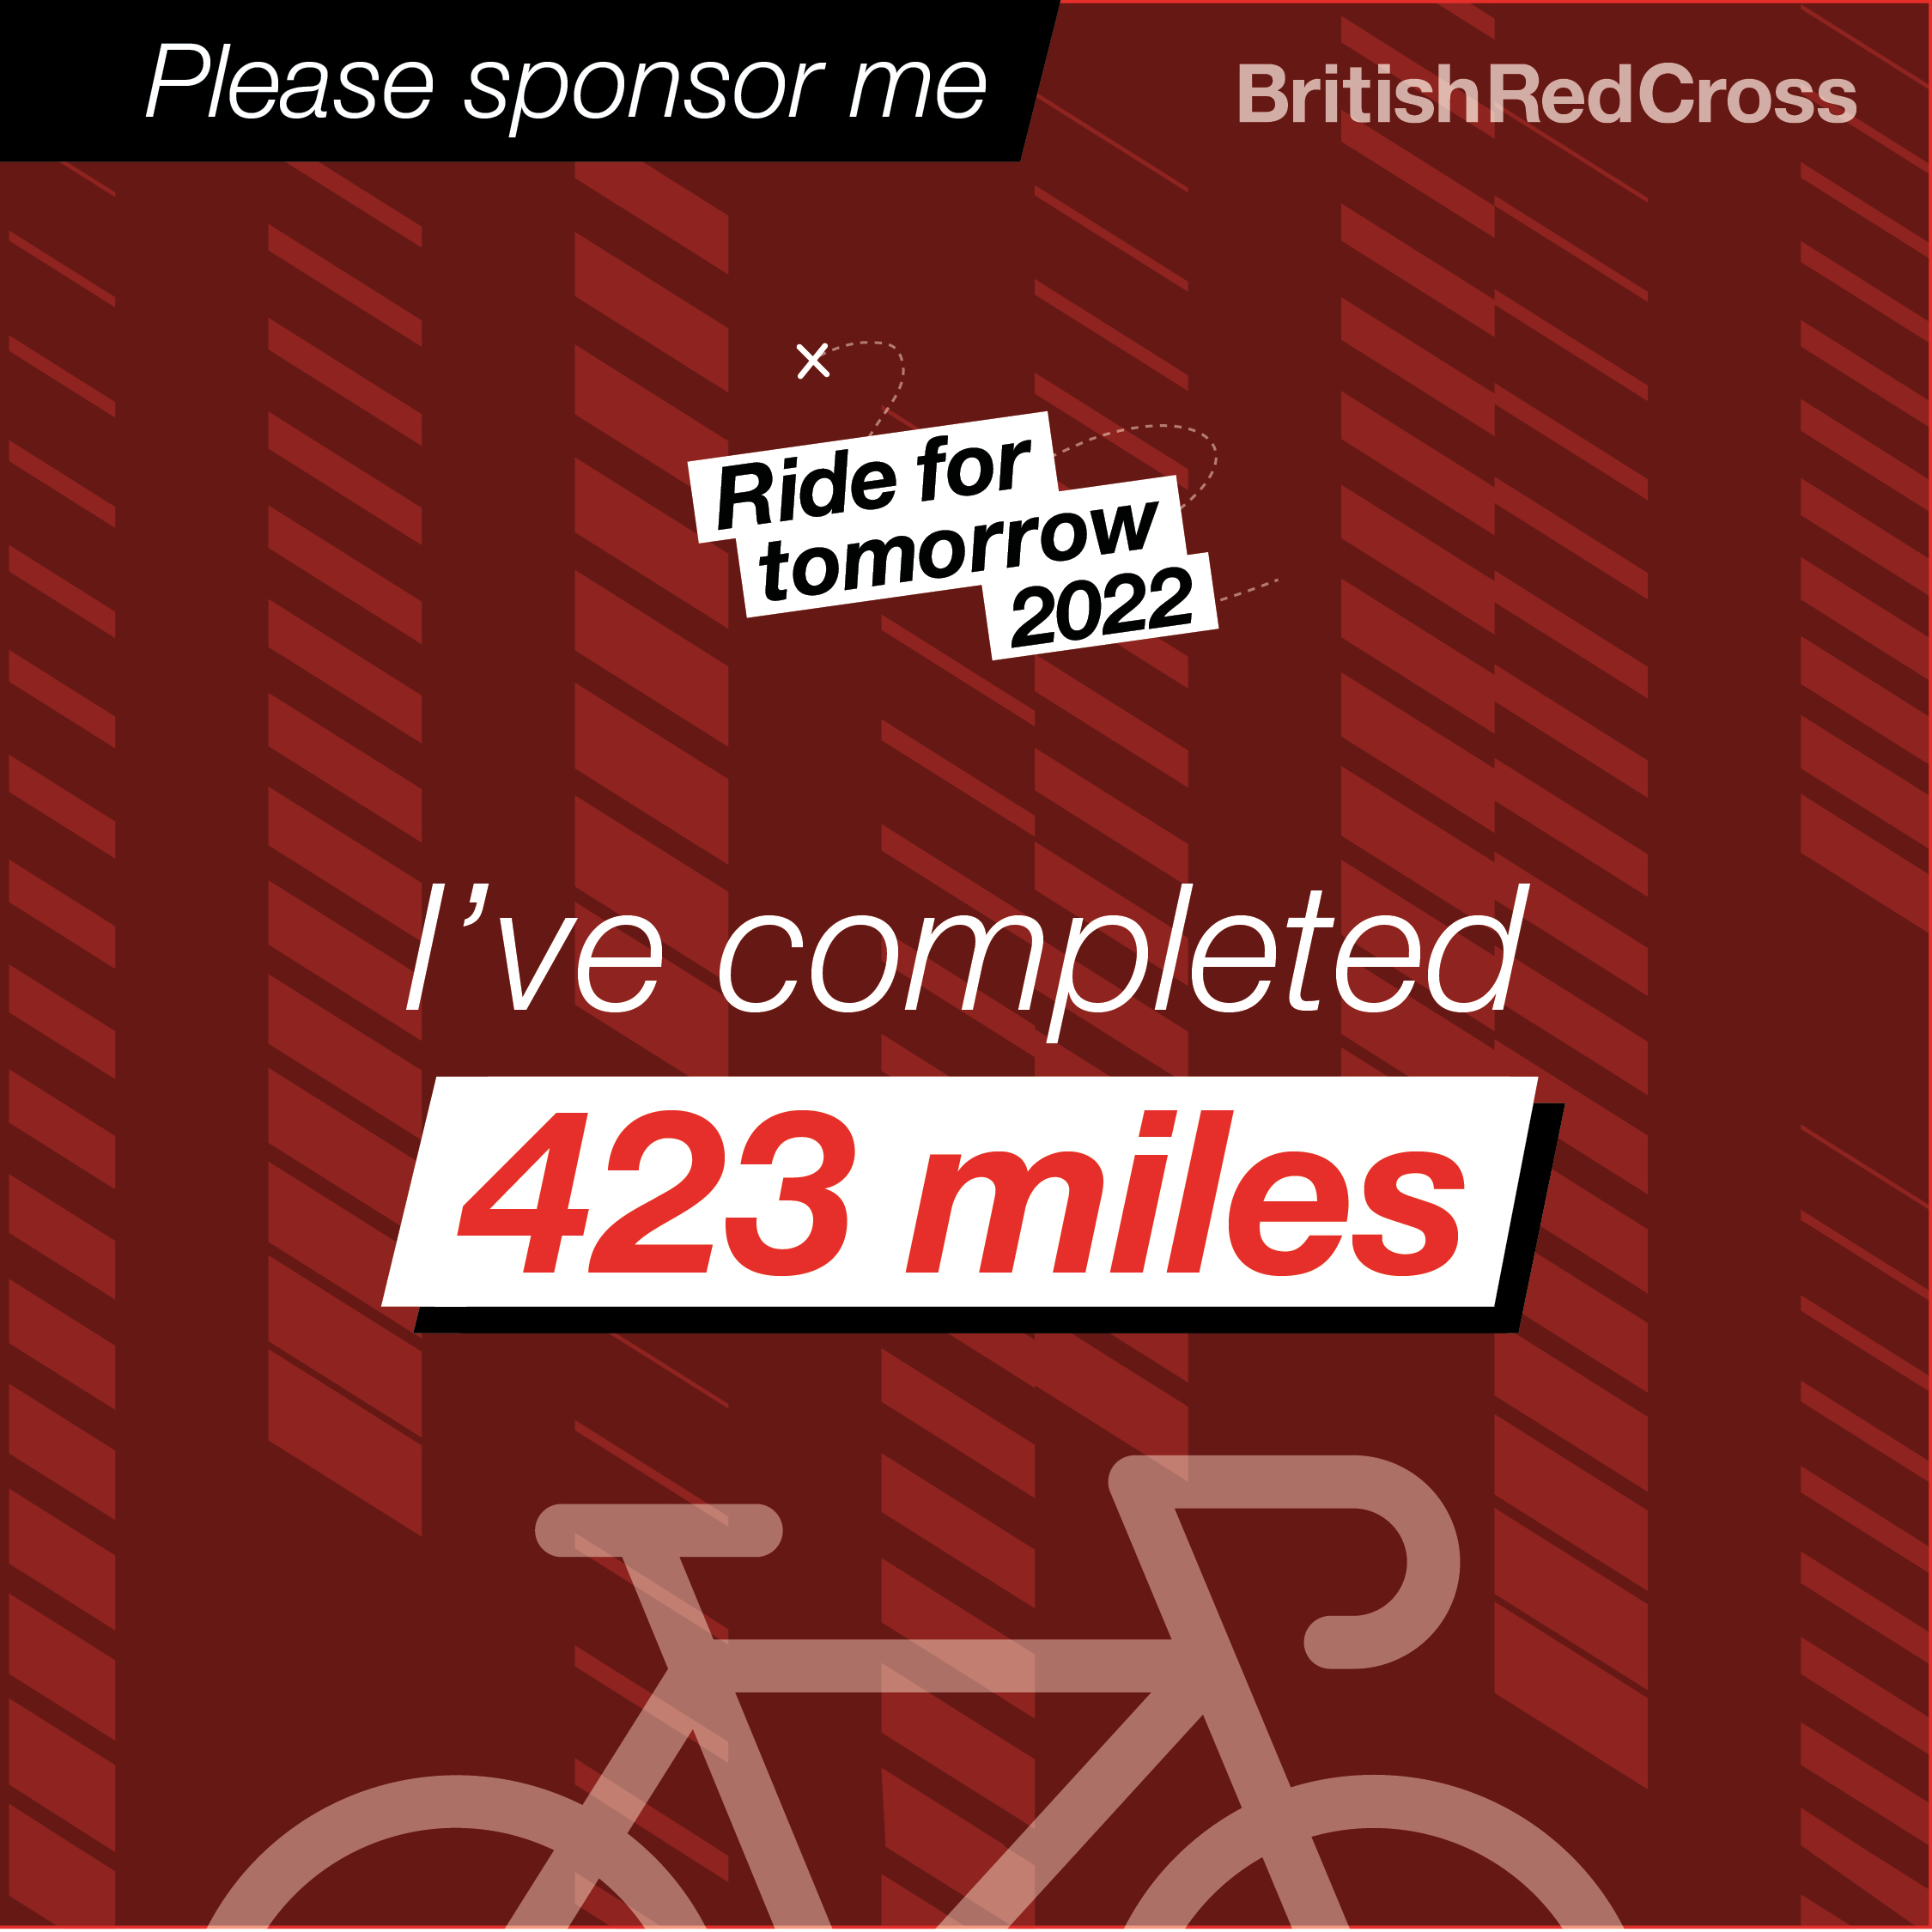 Please sponsor me. I've completed 423 miles. Text shown above a red bike on a red background